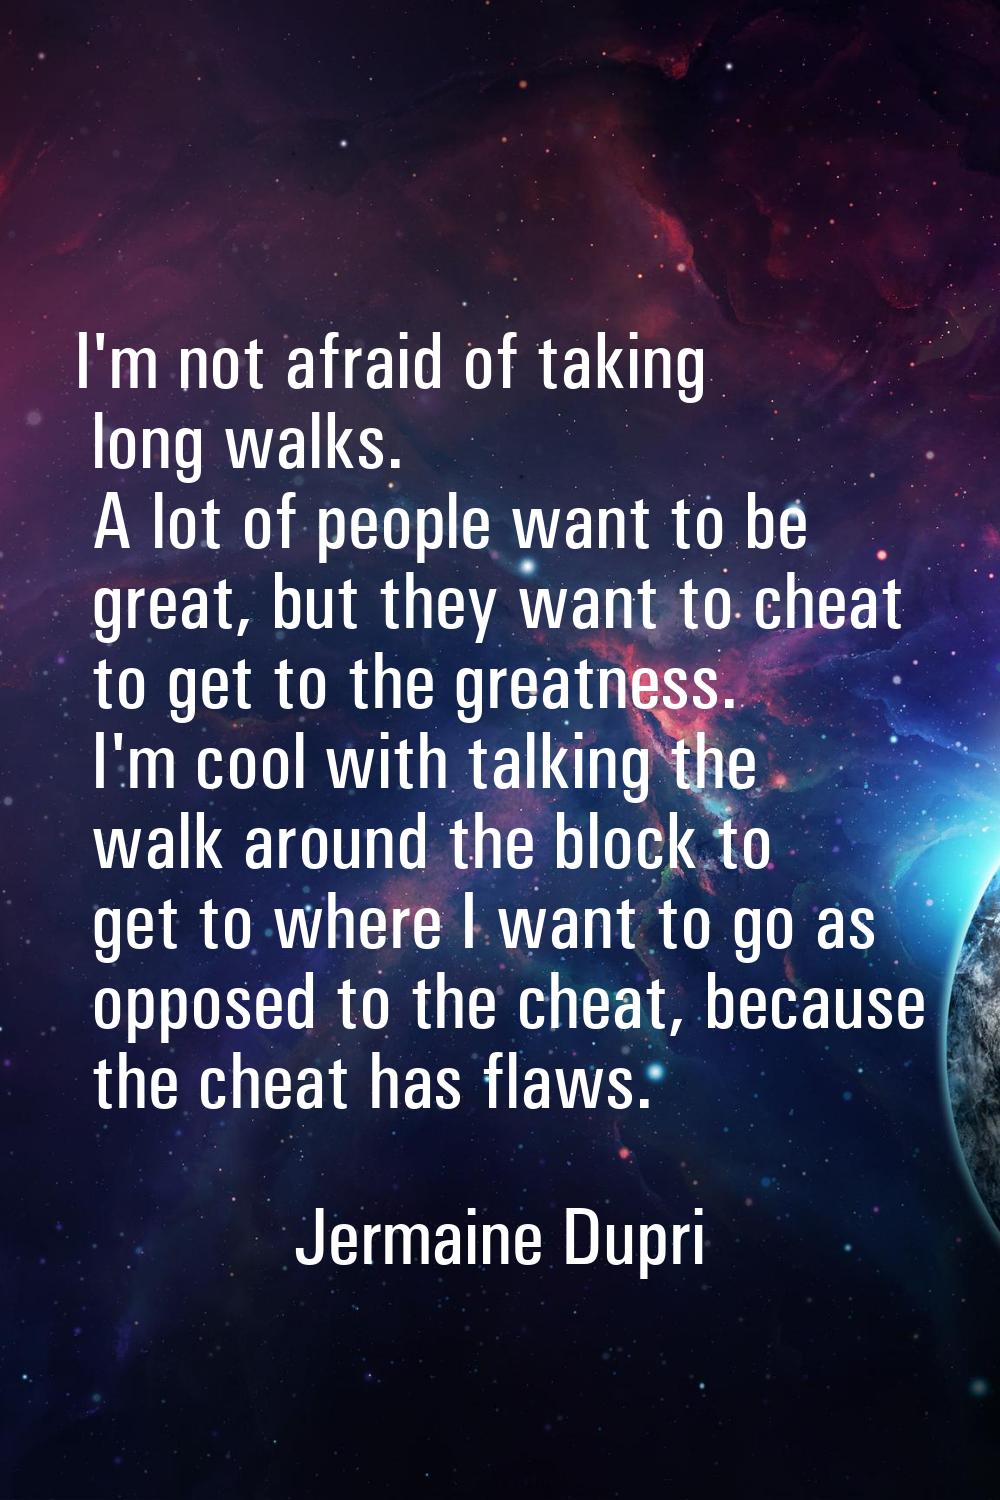 I'm not afraid of taking long walks. A lot of people want to be great, but they want to cheat to ge